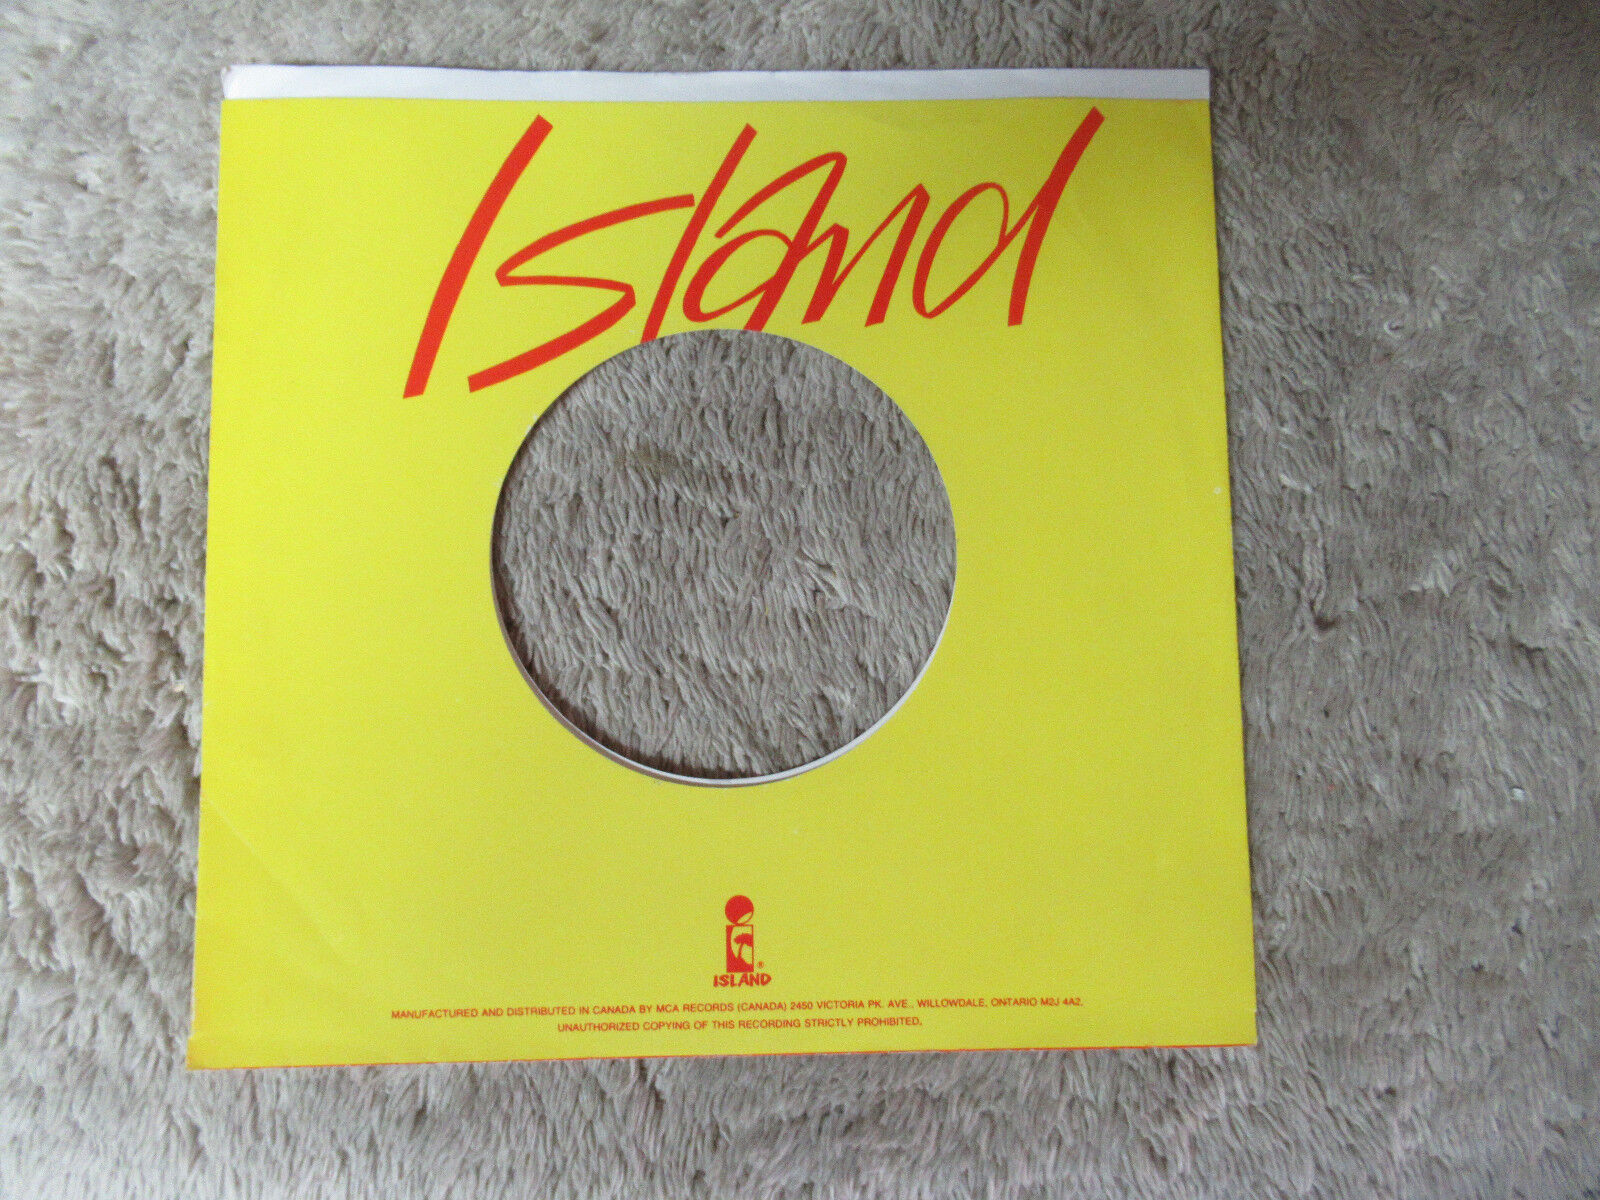  sleeve only ISLAND RED  YELLOW   45 record company sleeve